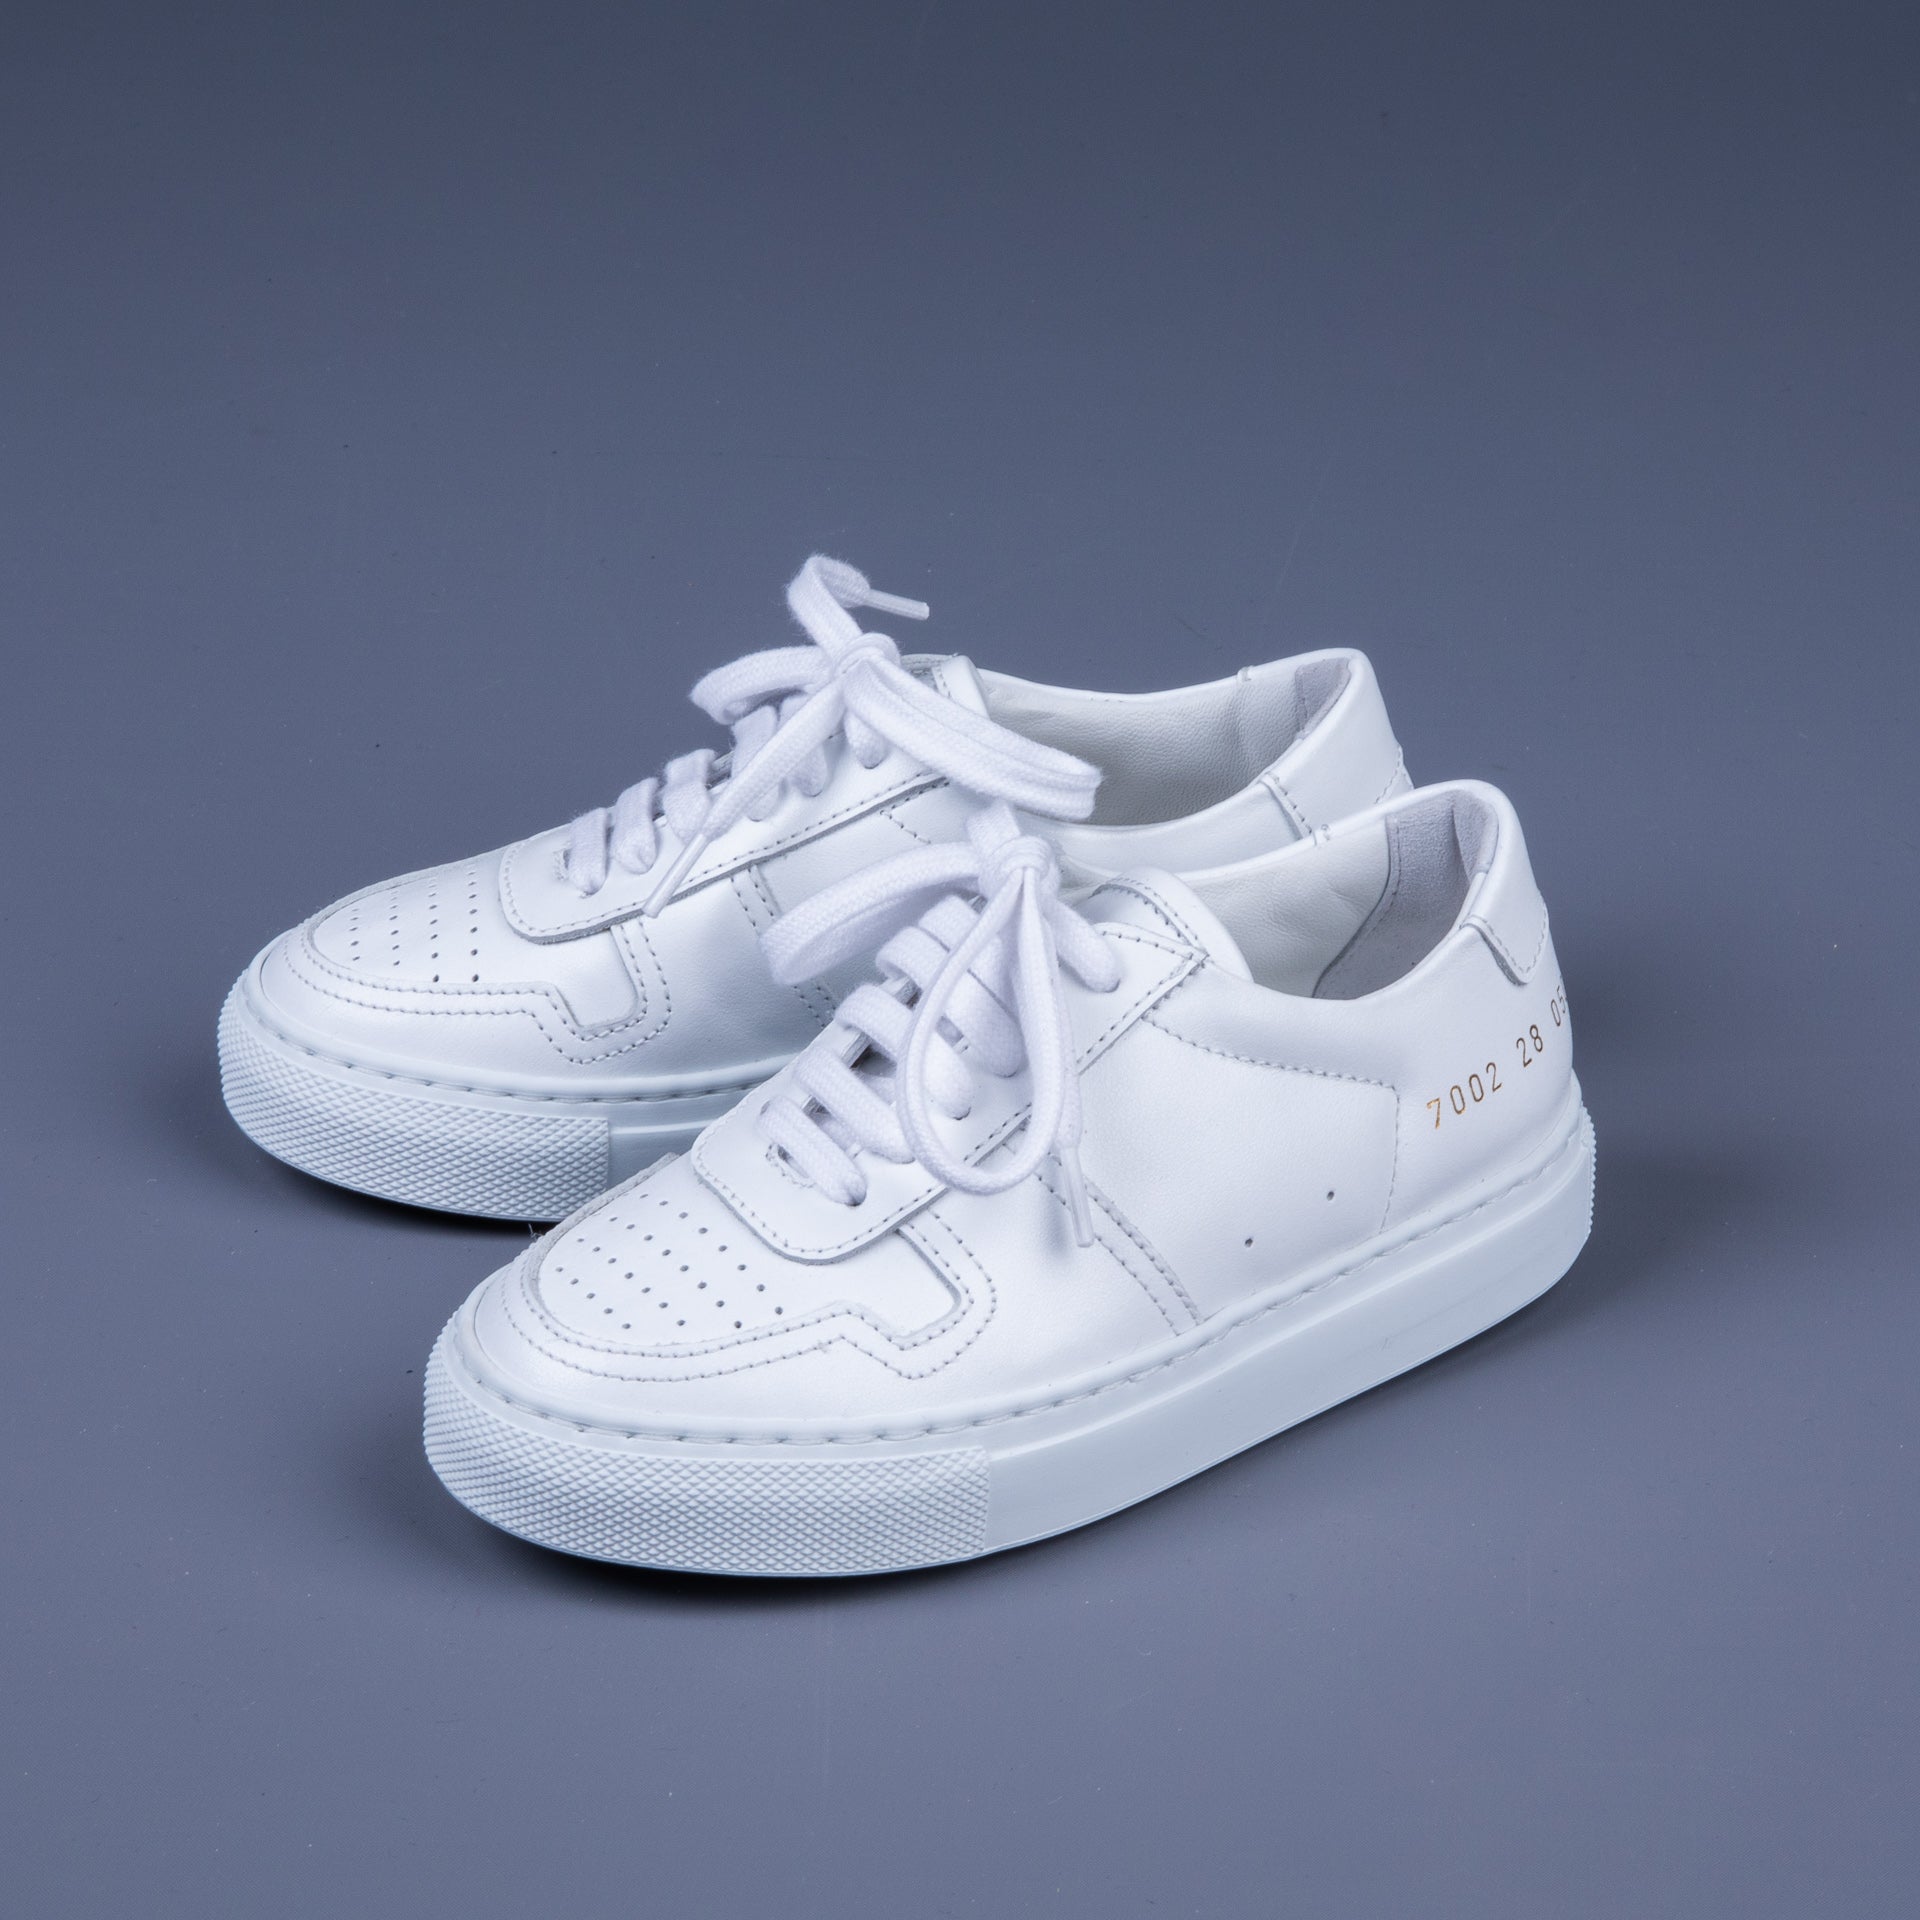 Common Projects Kids Bball Low in Leather White